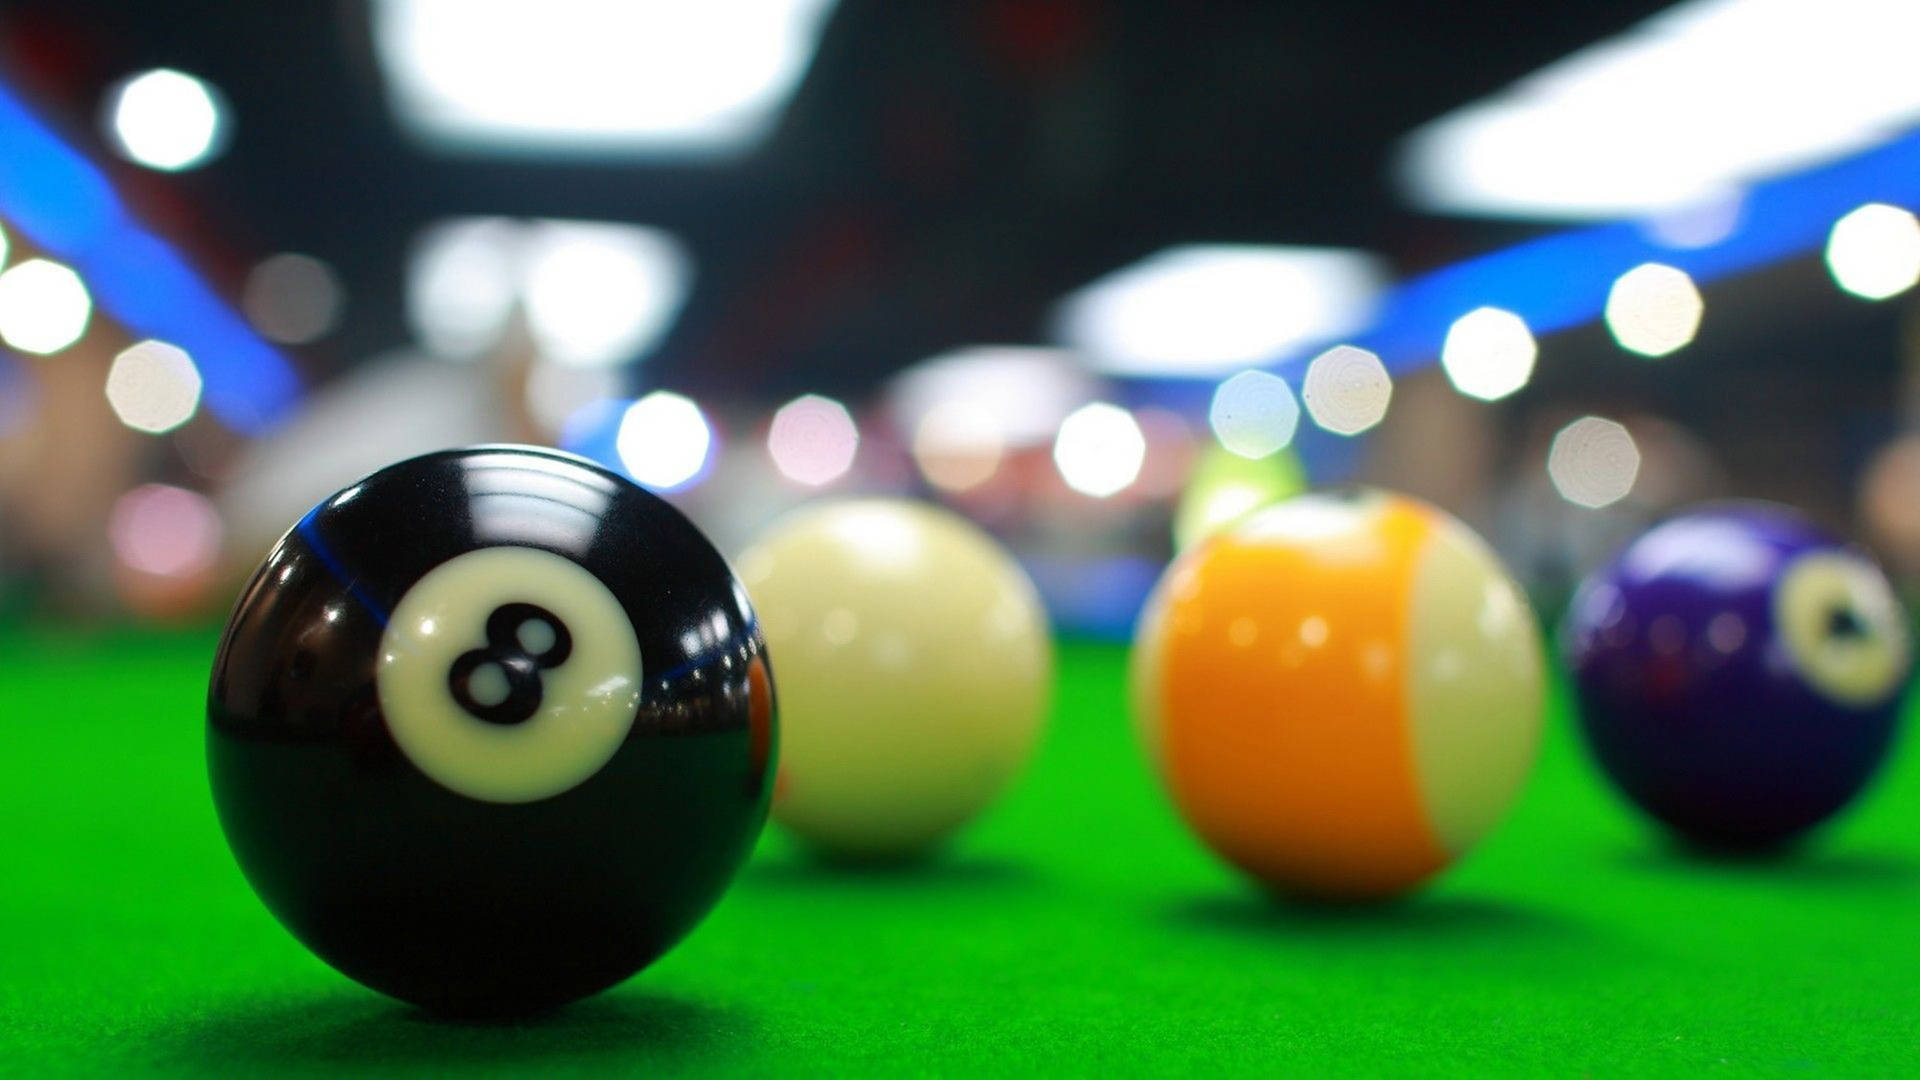 Caption: Competitive Snooker Play - Detailed Shot Of Balls Positioned On Green Table Background